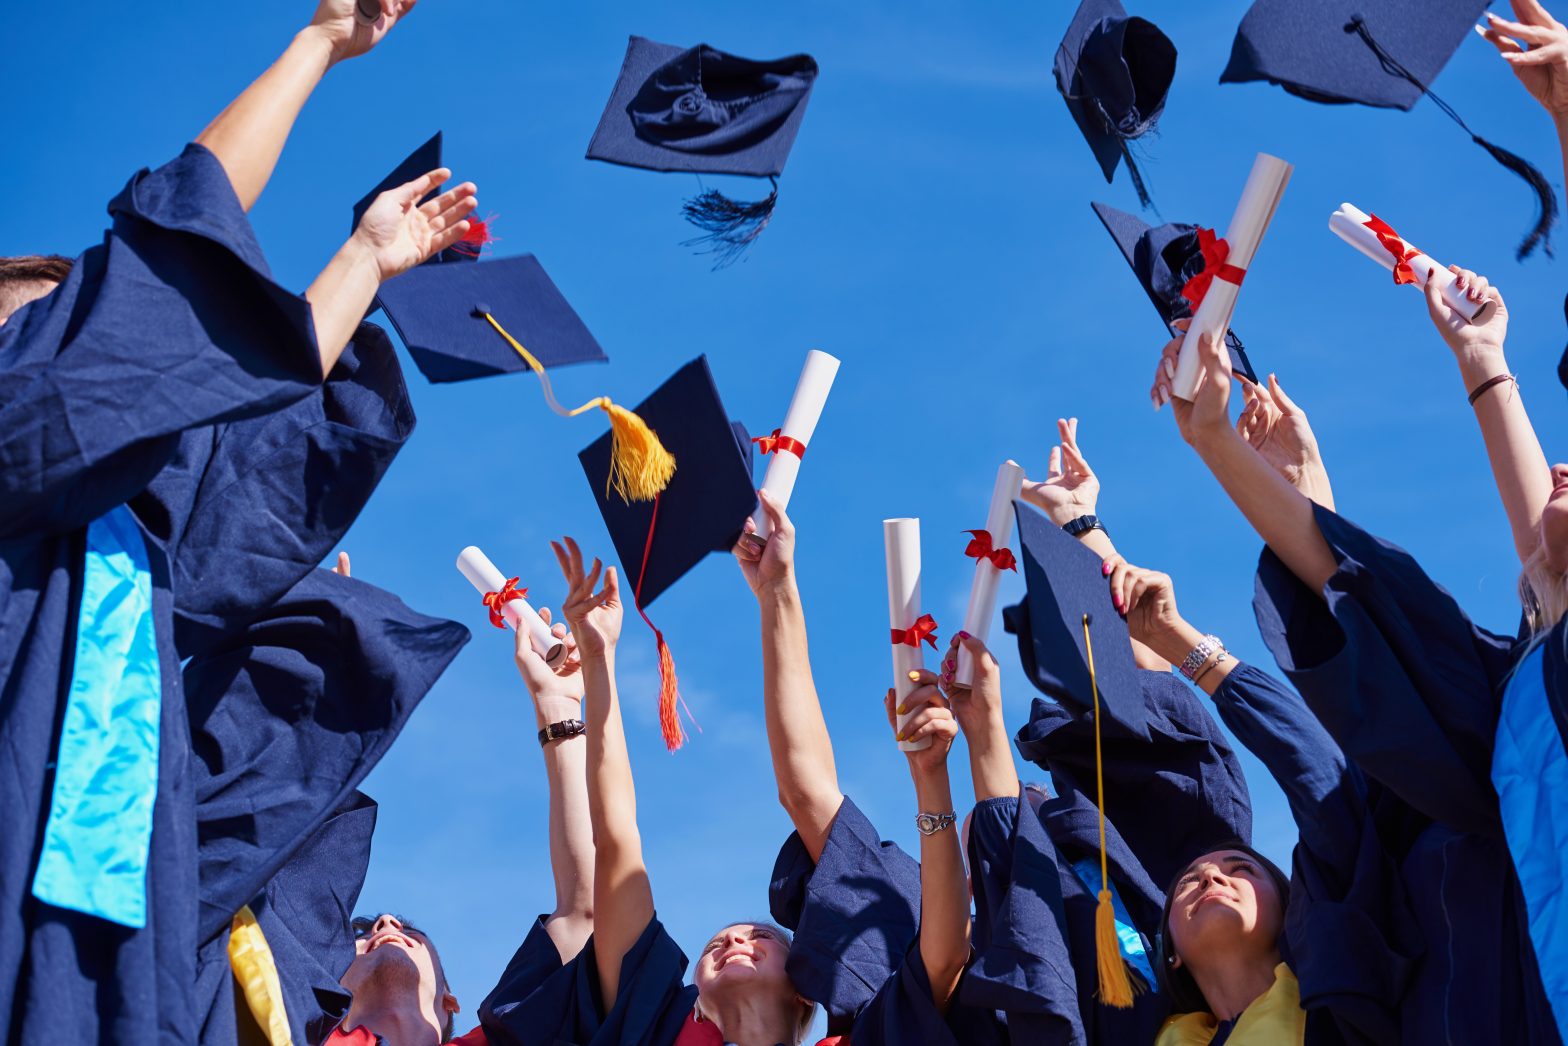 High school student graduates tossing up hats over blue sky.